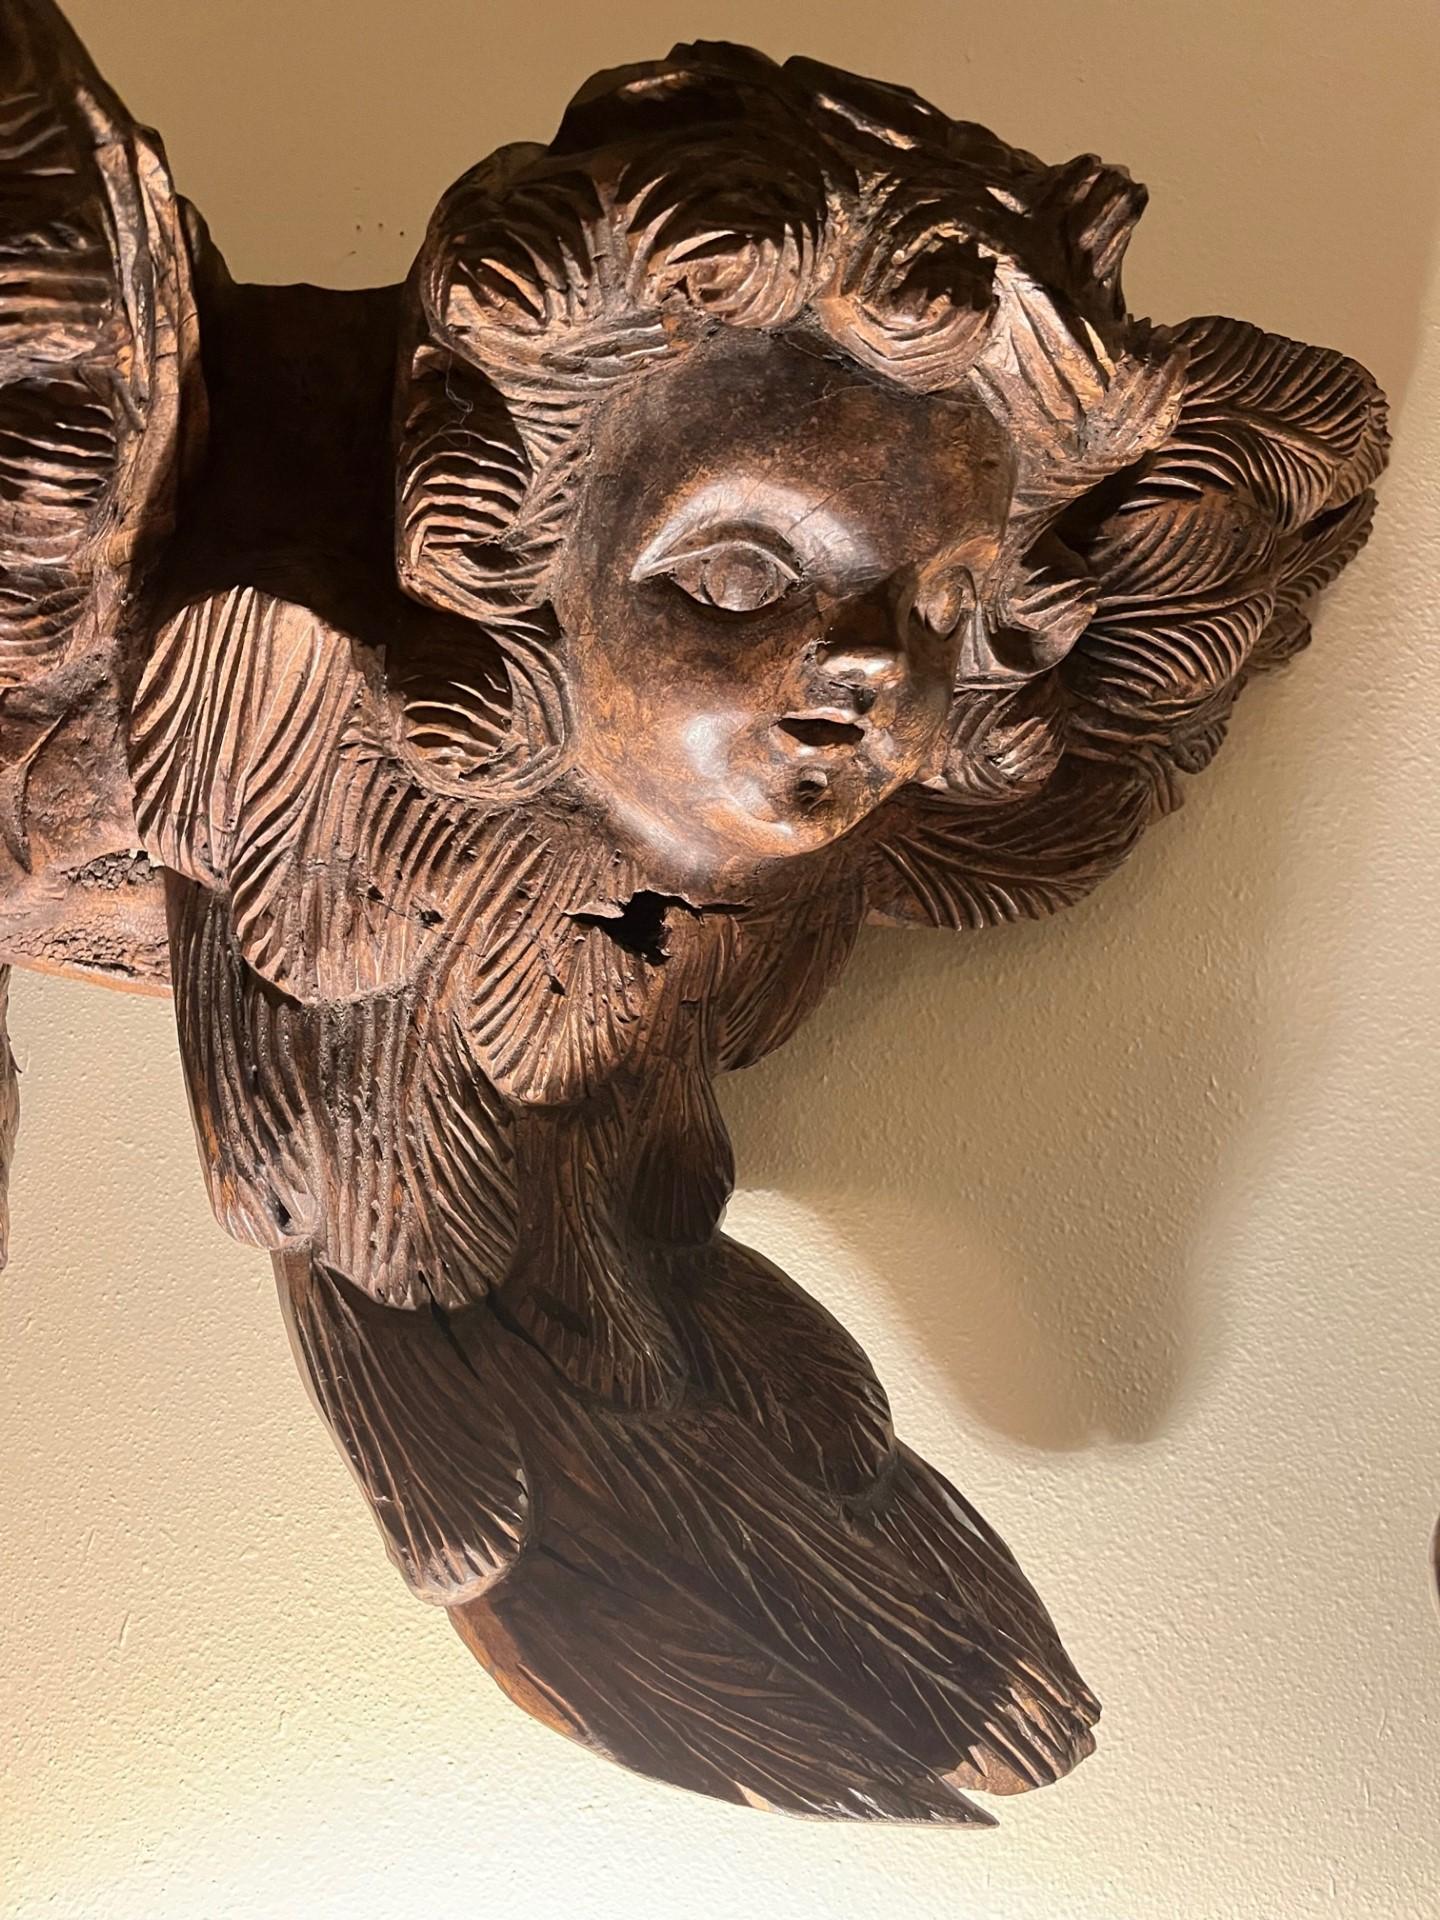 Rare Large 15th Century Renaissance English Oak Roof Angels Corbel.

Truly astonishing rare roof angels, circa 1450. The large Medieval carving features two angel heads with elaborate feathered wings. The details, applied by a master craftsman. show